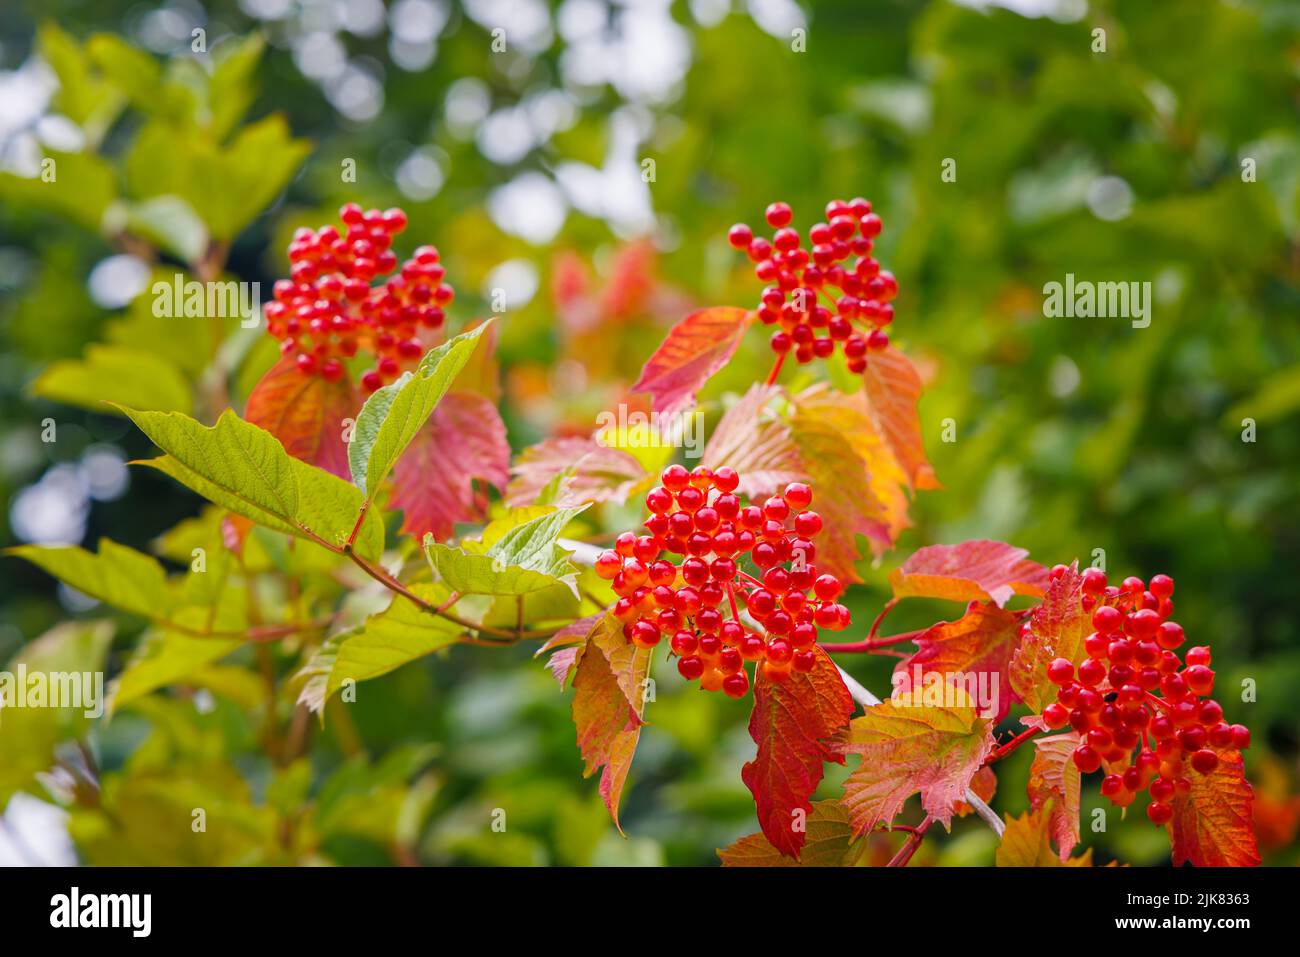 Close-up view of a bunch of orange to red waxy drupes (stone fruits) of Viburnum opulus (guelder rose) in summer in Devon, south-west England Stock Photo